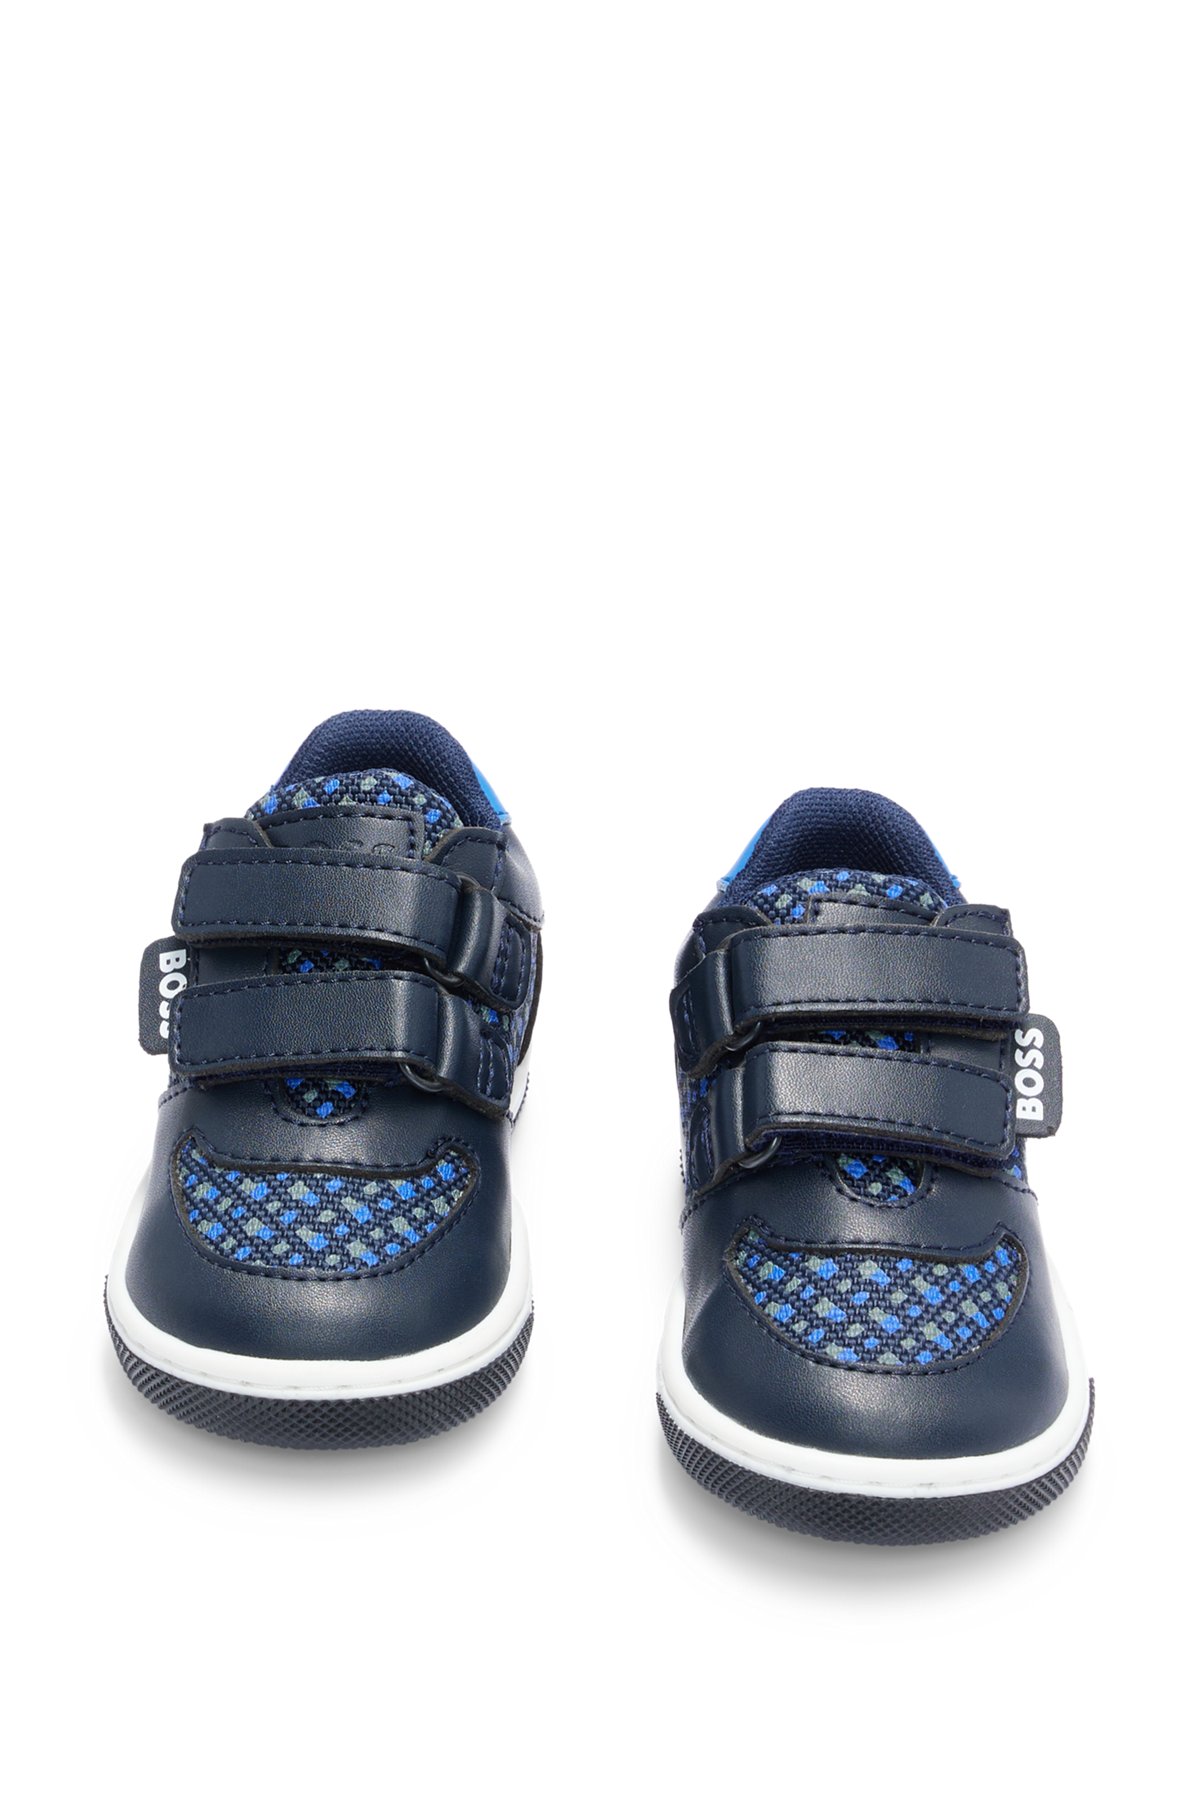 Kids' trainers in mixed materials with printed monograms, Dark Blue